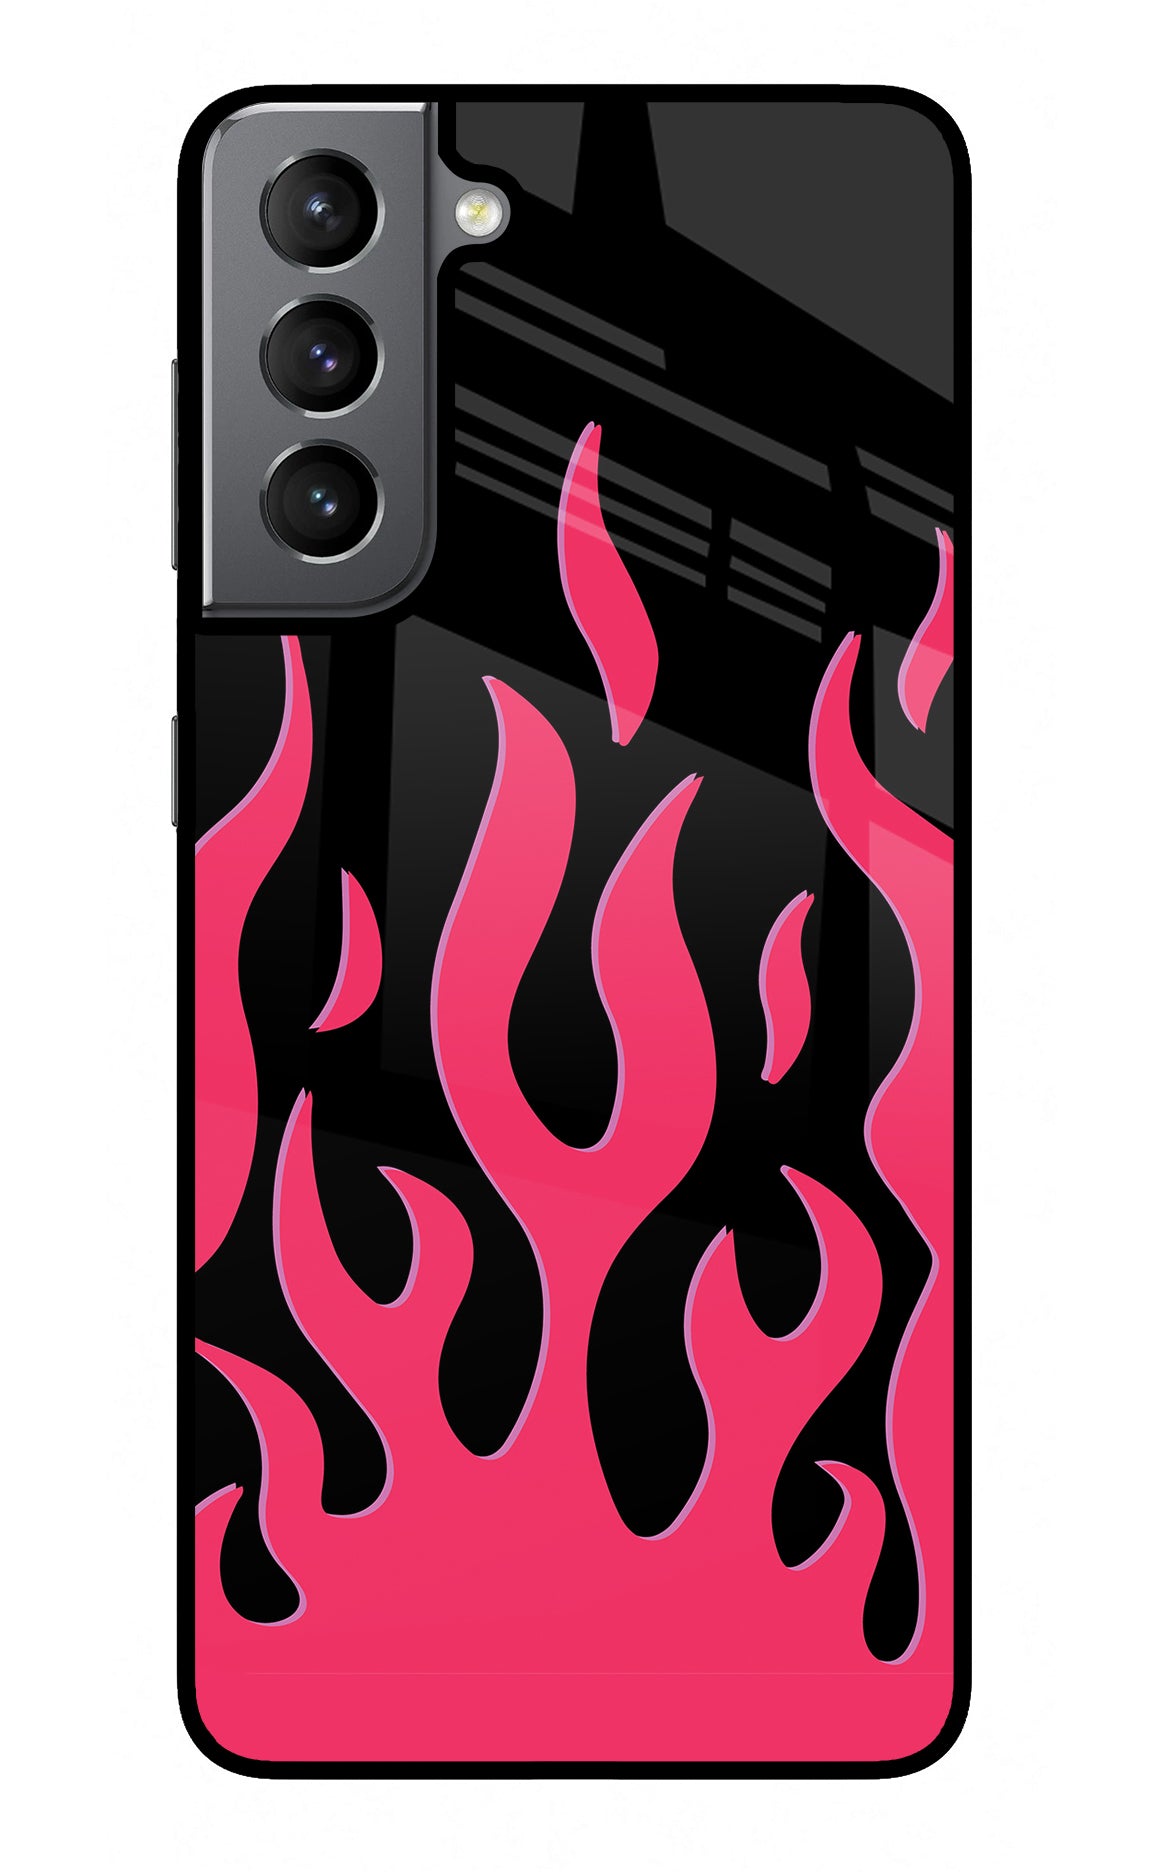 Fire Flames Samsung S21 Back Cover